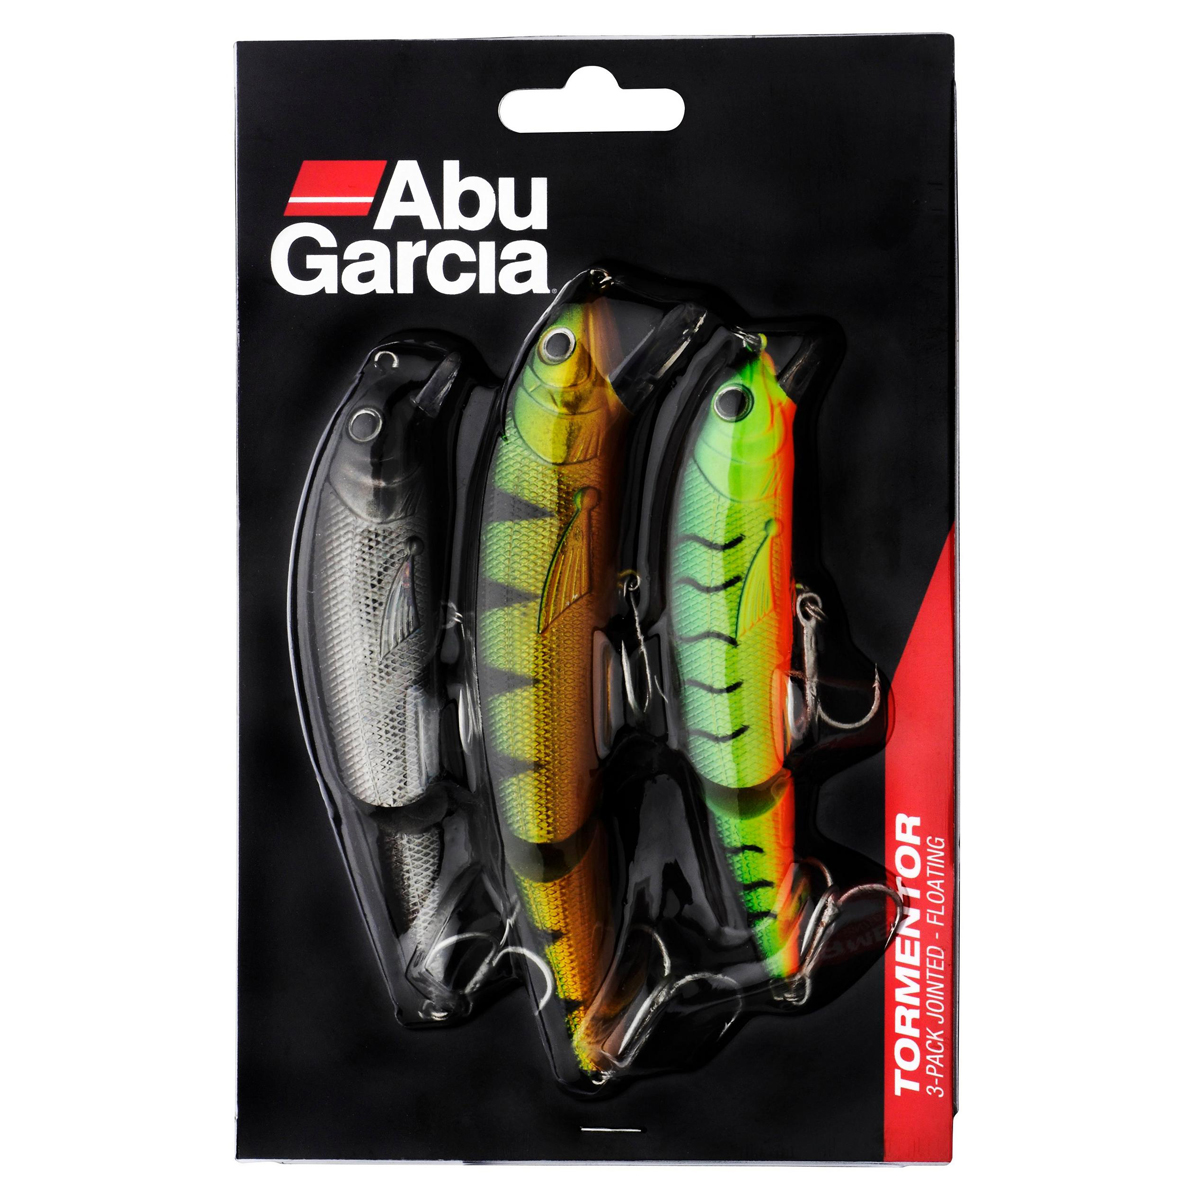 Abu Garcia Tormentor (3 pieces) - Jointed